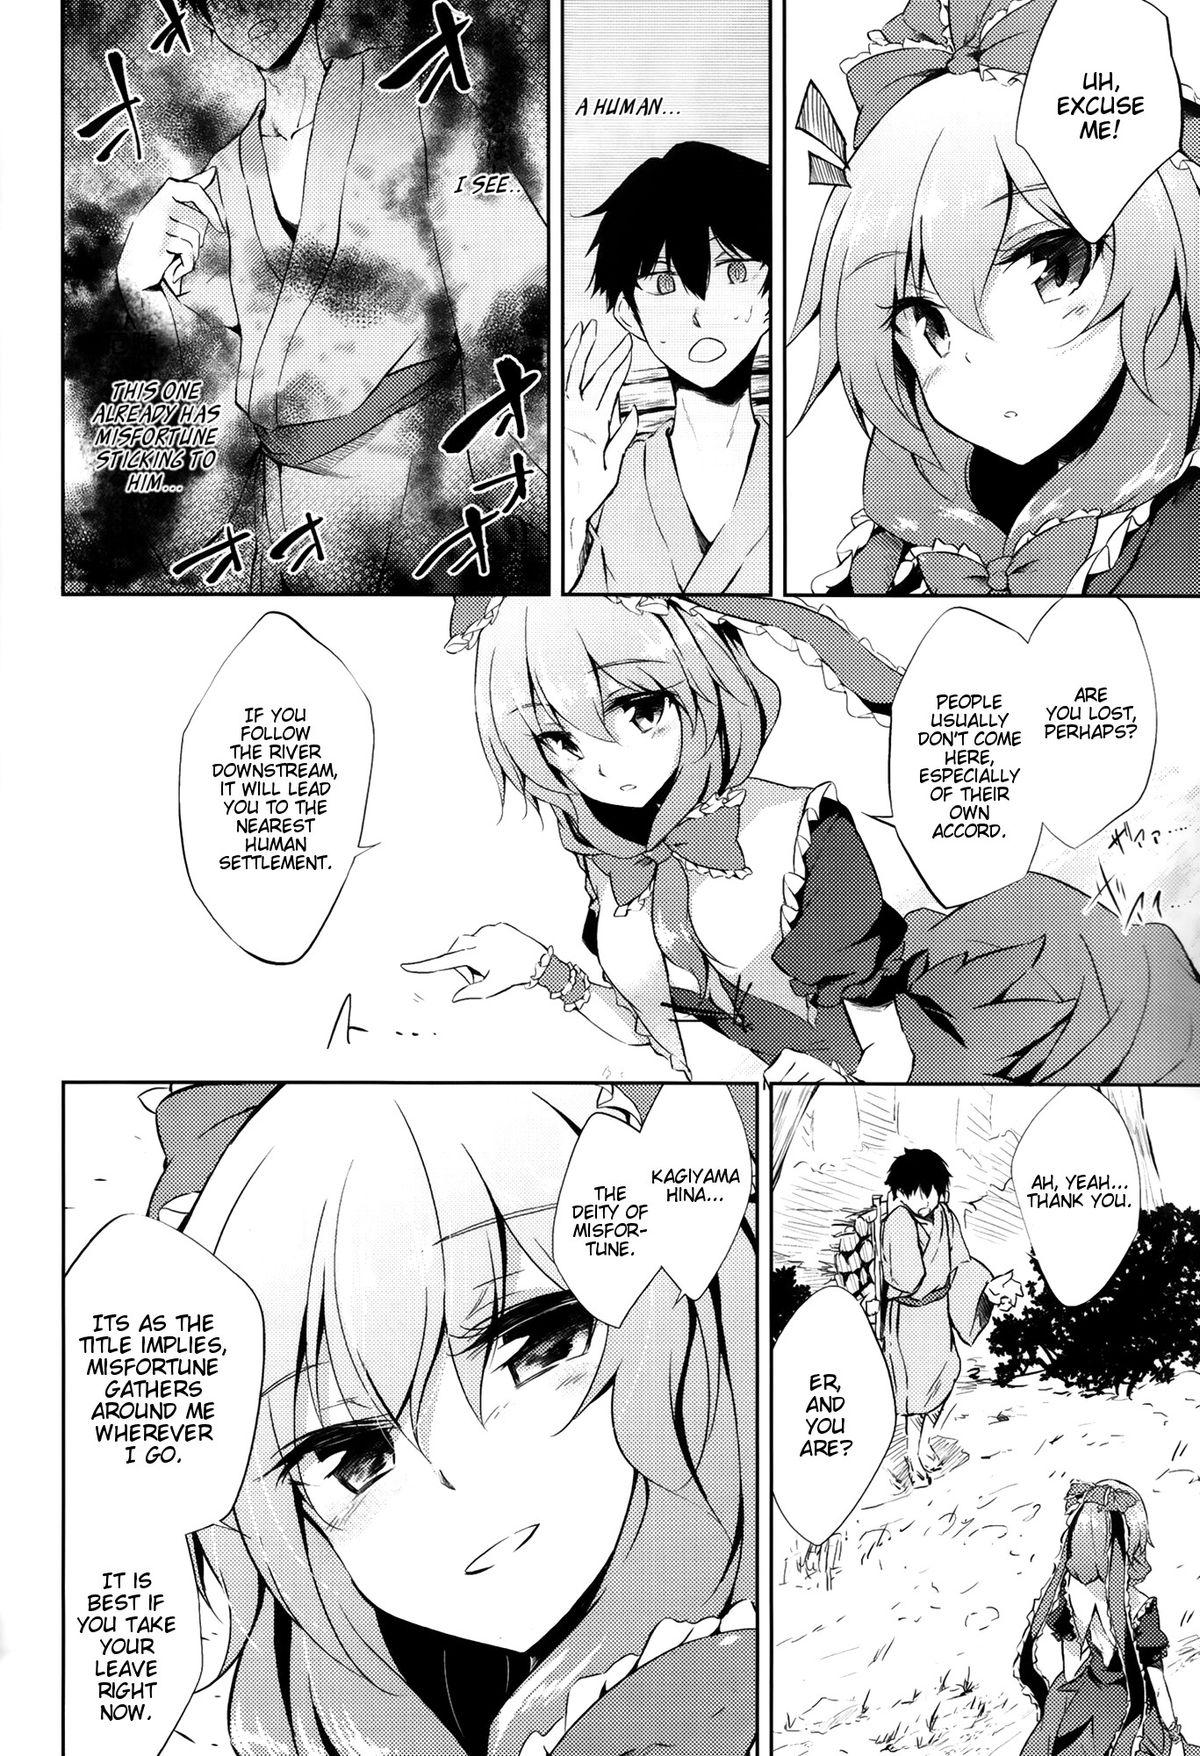 Cum Swallow *Chuui* Horeru to Yakui kara | *Warning* Fall in love at your own risk - Touhou project Aunty - Page 4